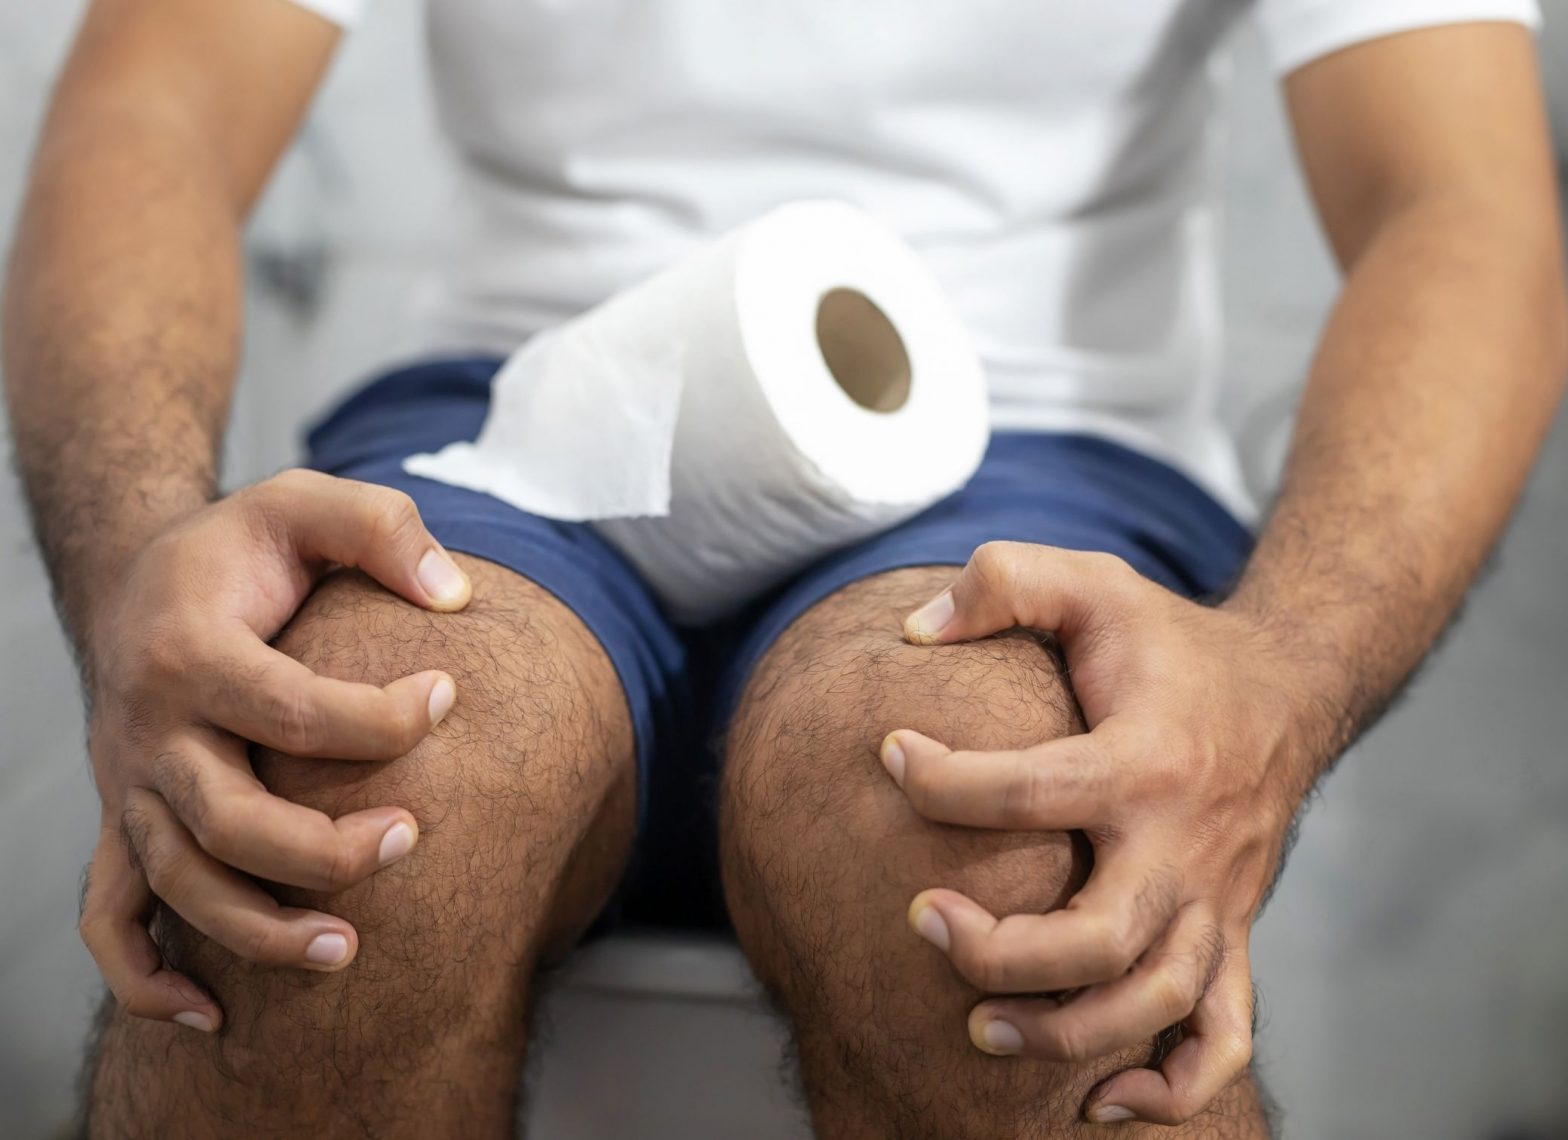 Man seated on a toilet with tissue paper placed on his thigh